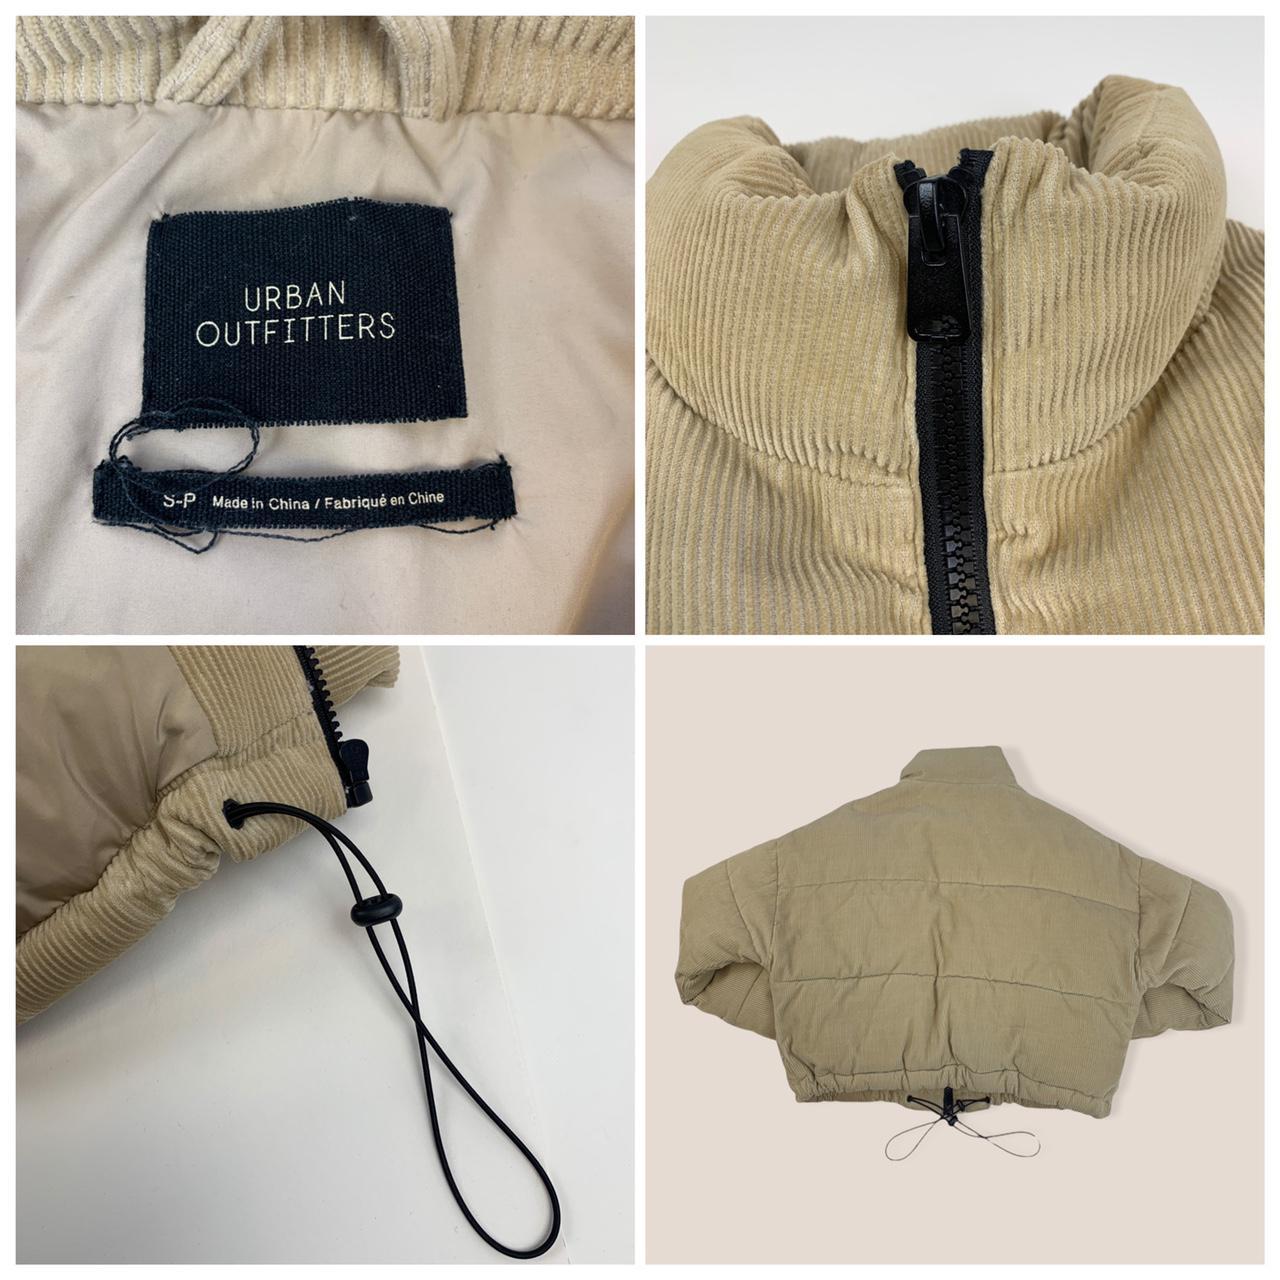 Urban Outfitters Women's Tan and Cream Jacket (4)